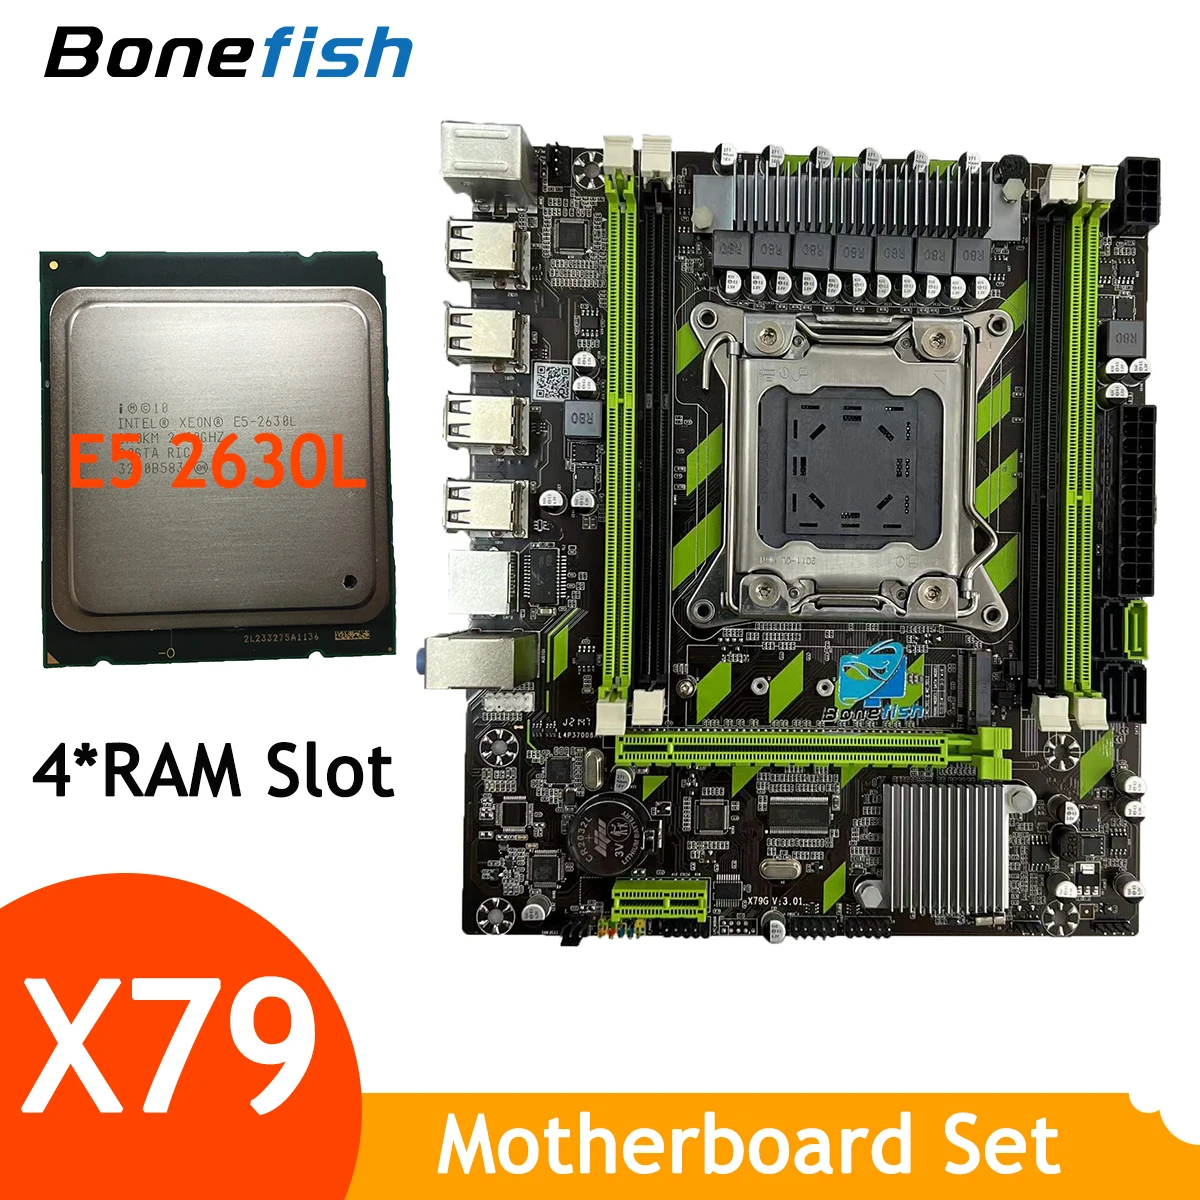 

4 RAM Slot X79 Motherboard Kit Combo Set with Intel Xeon E5 2630L Processor LGA 2011 Support DDR3 1066 1333 1600 MHz NVME M.2 M2